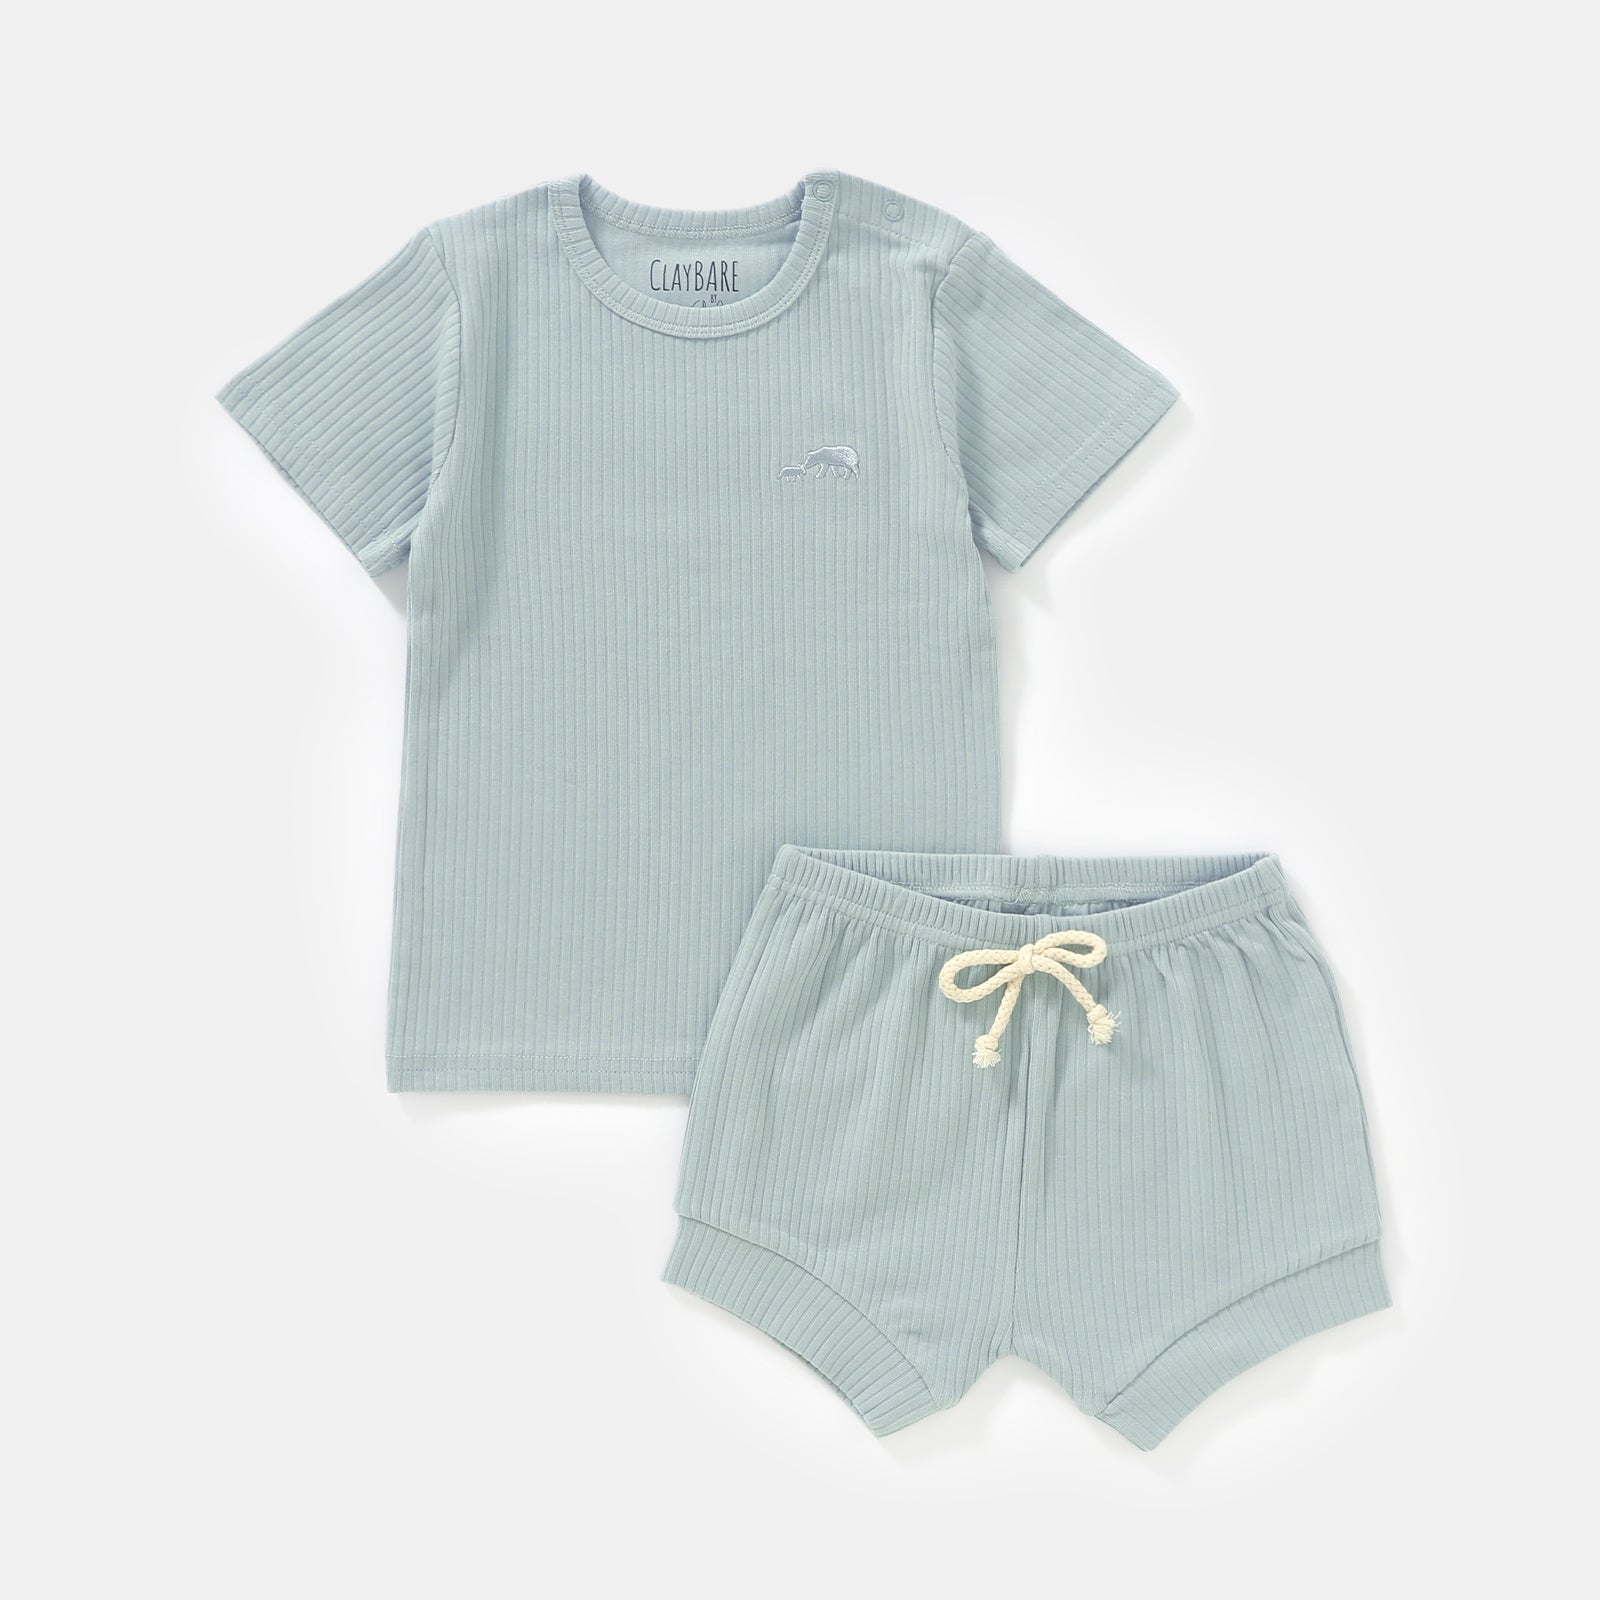 ClayBARE Mint Ribbed Shorts (Shorts only)